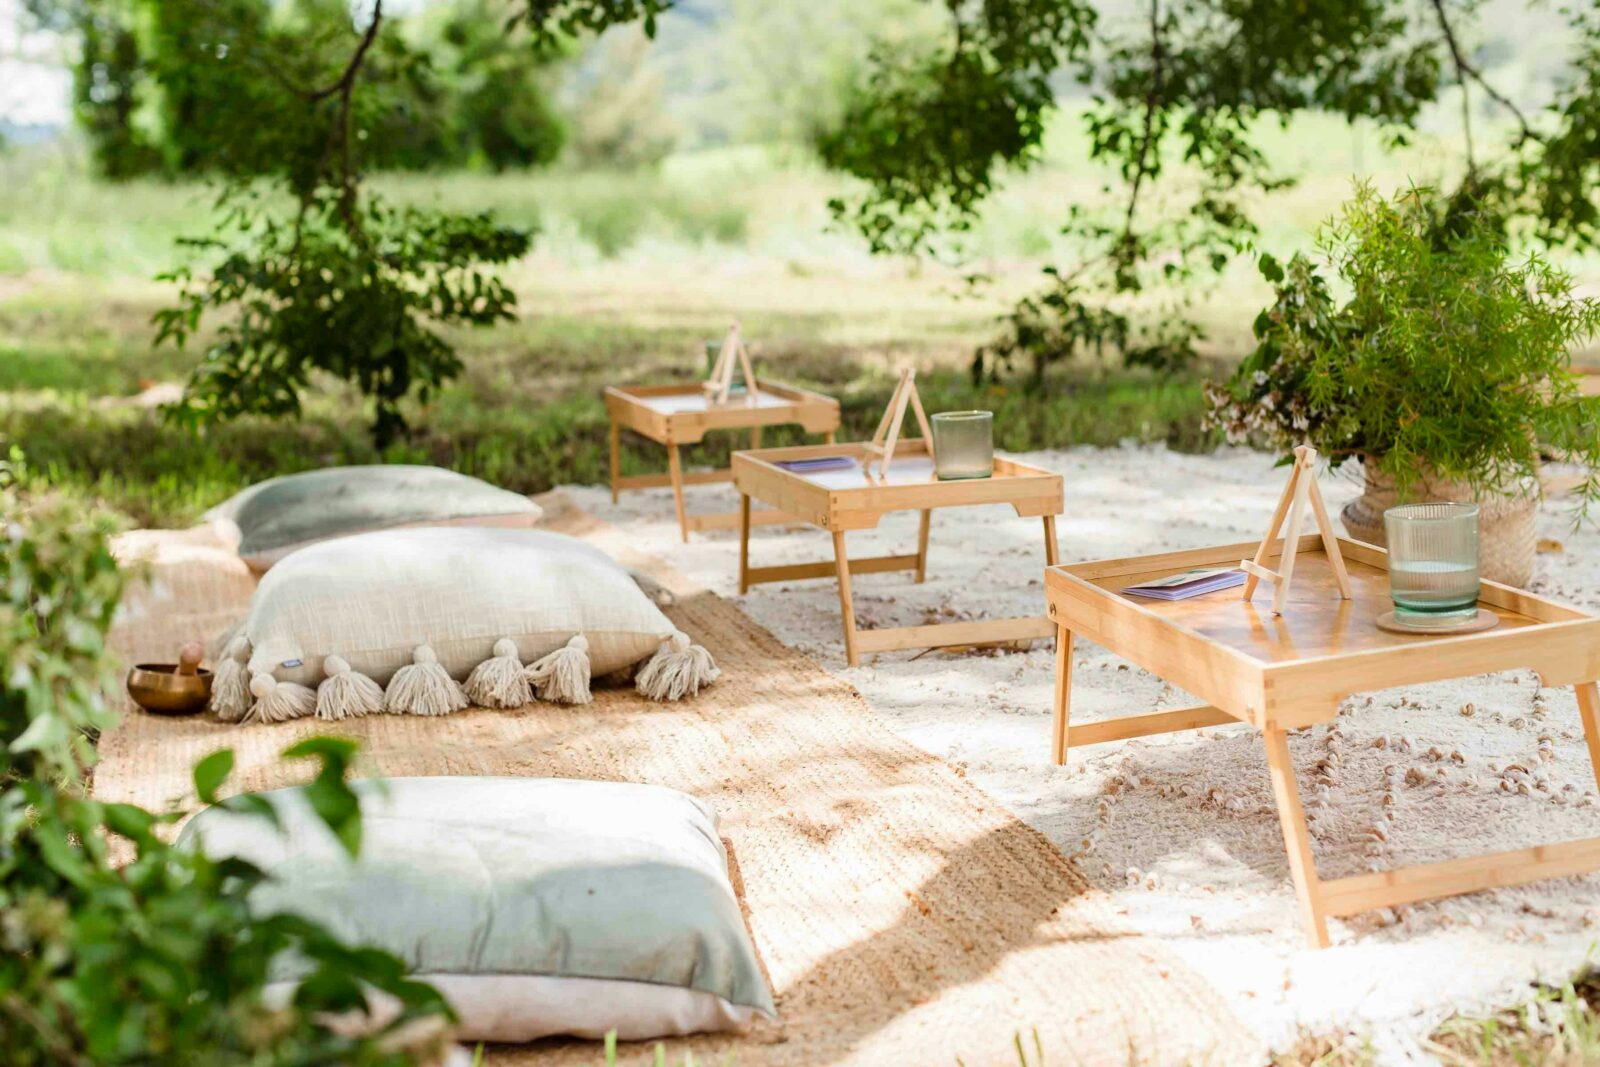 Picnic rugs and cushions with small tables